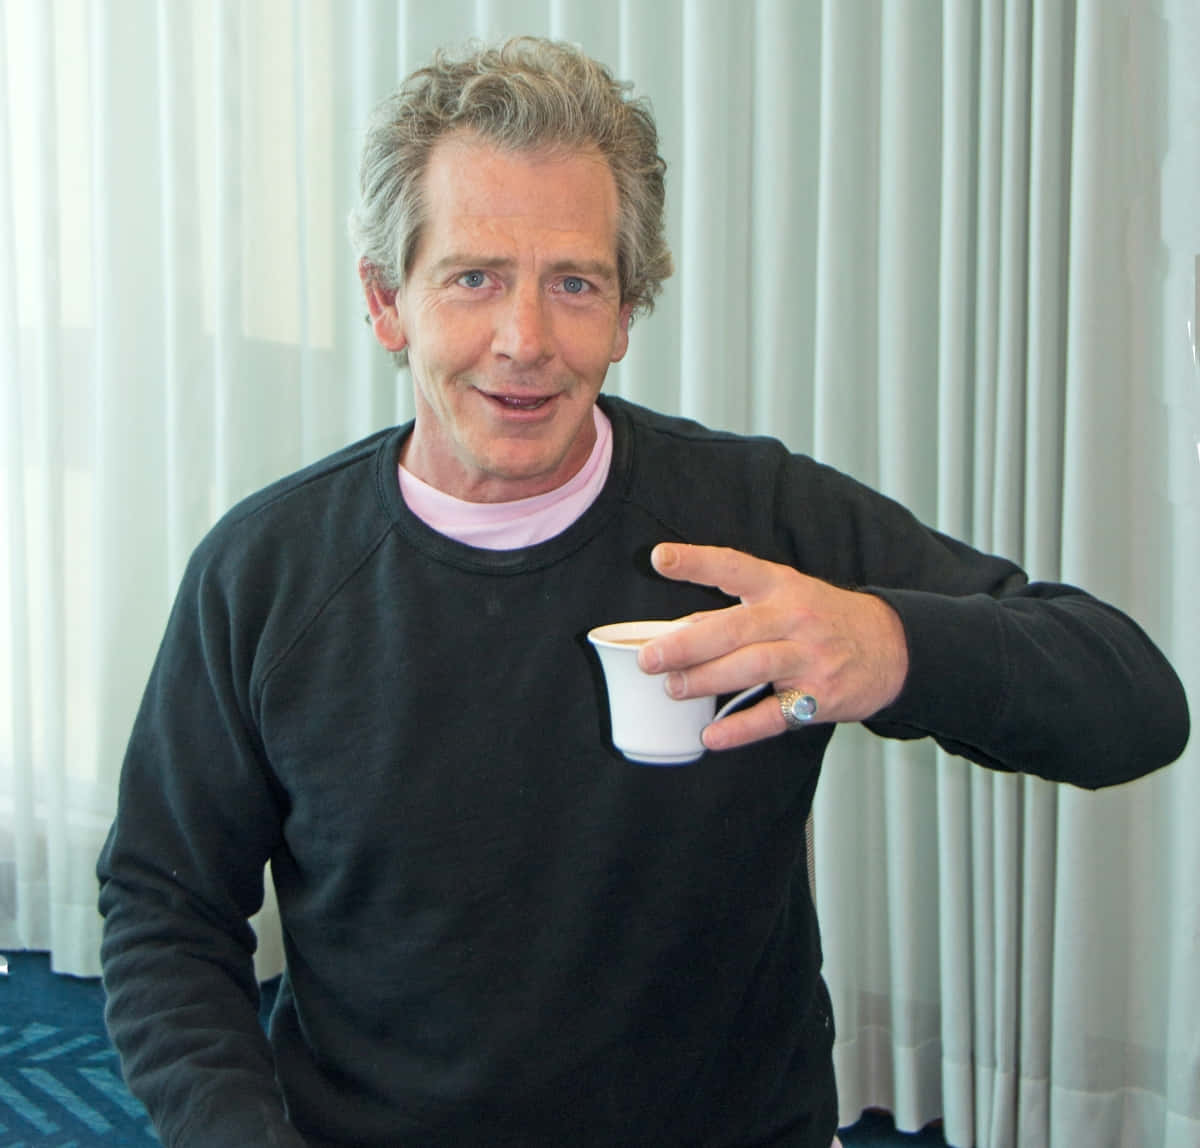 Ben Mendelsohn Casual Portrait With Coffee Cup